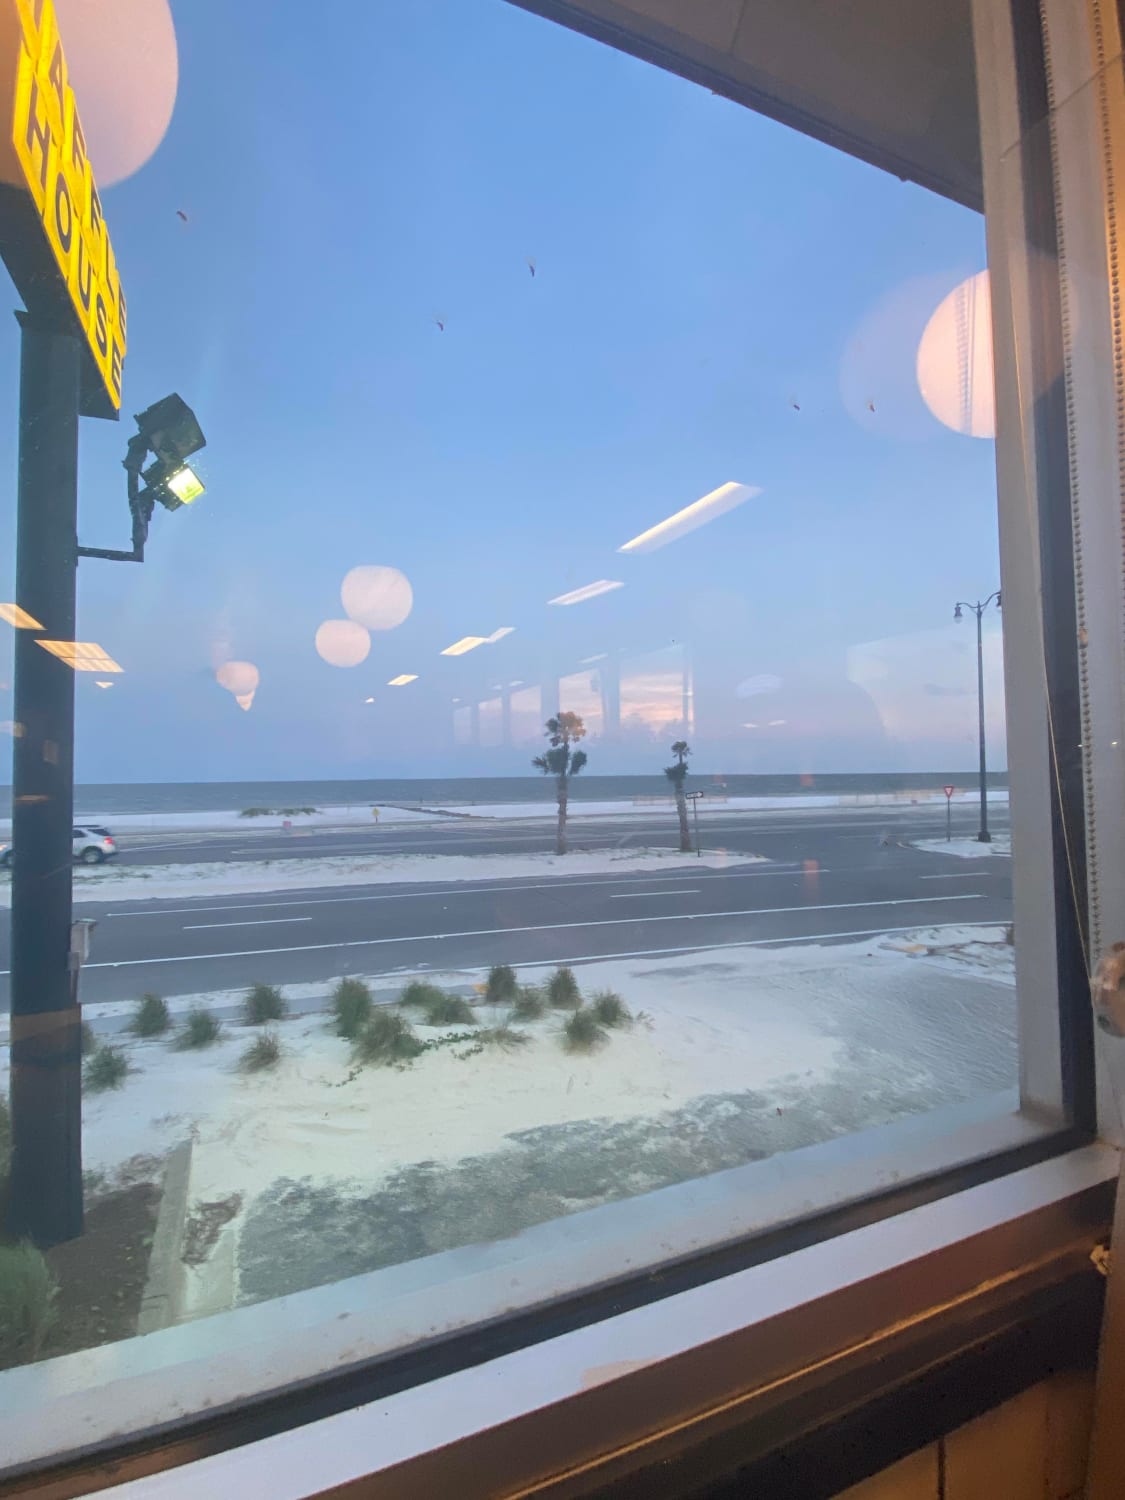 I work at Waffle House in Mississippi, my view every night